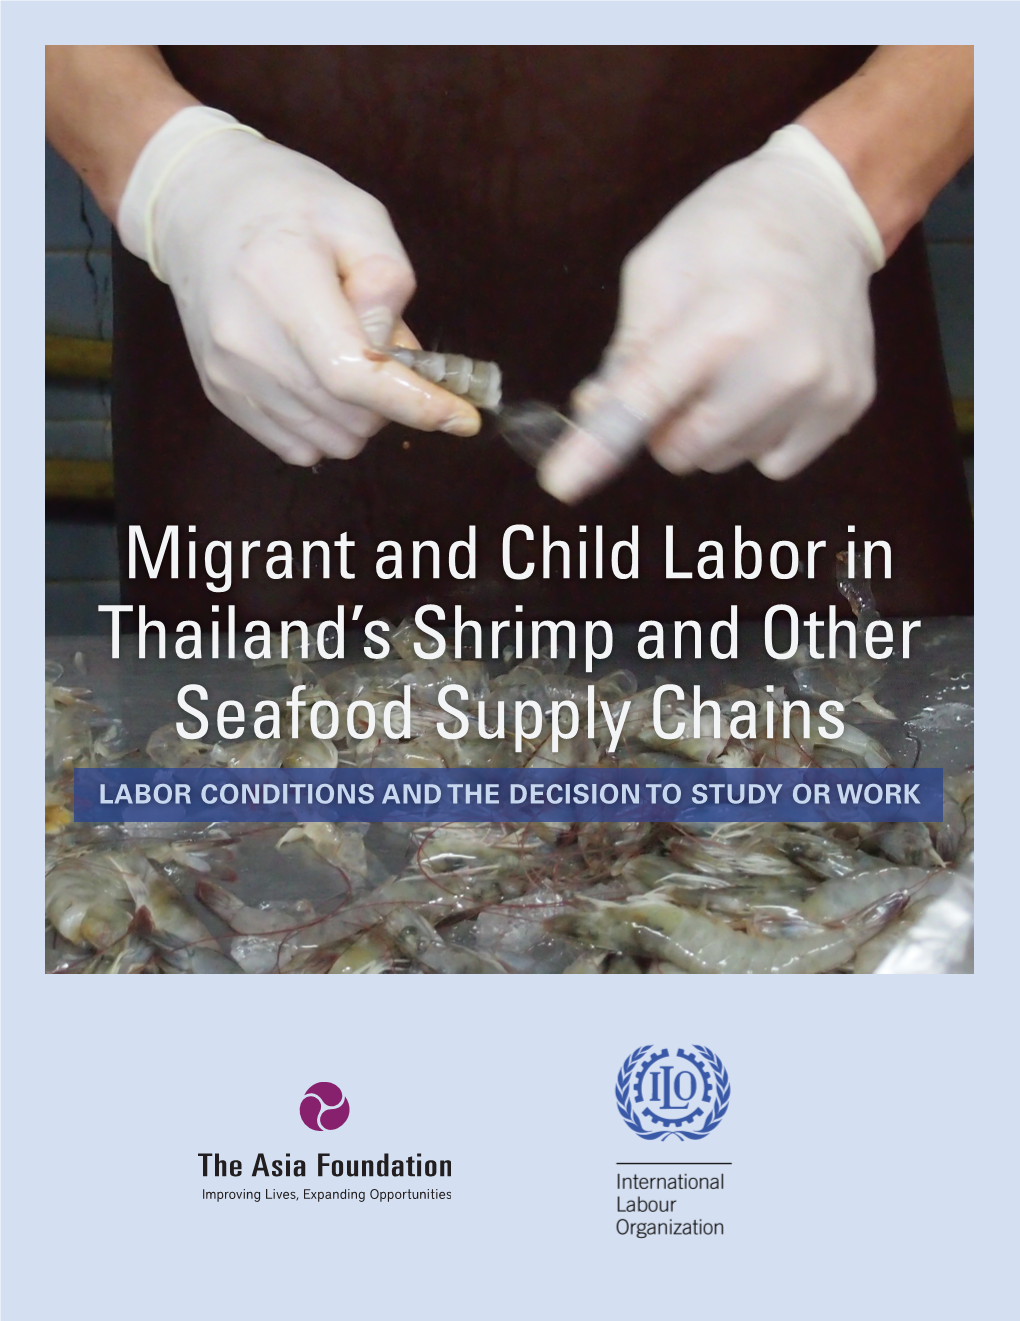 Migrant and Child Labor in Thailand's Shrimp and Other Seafood Supply